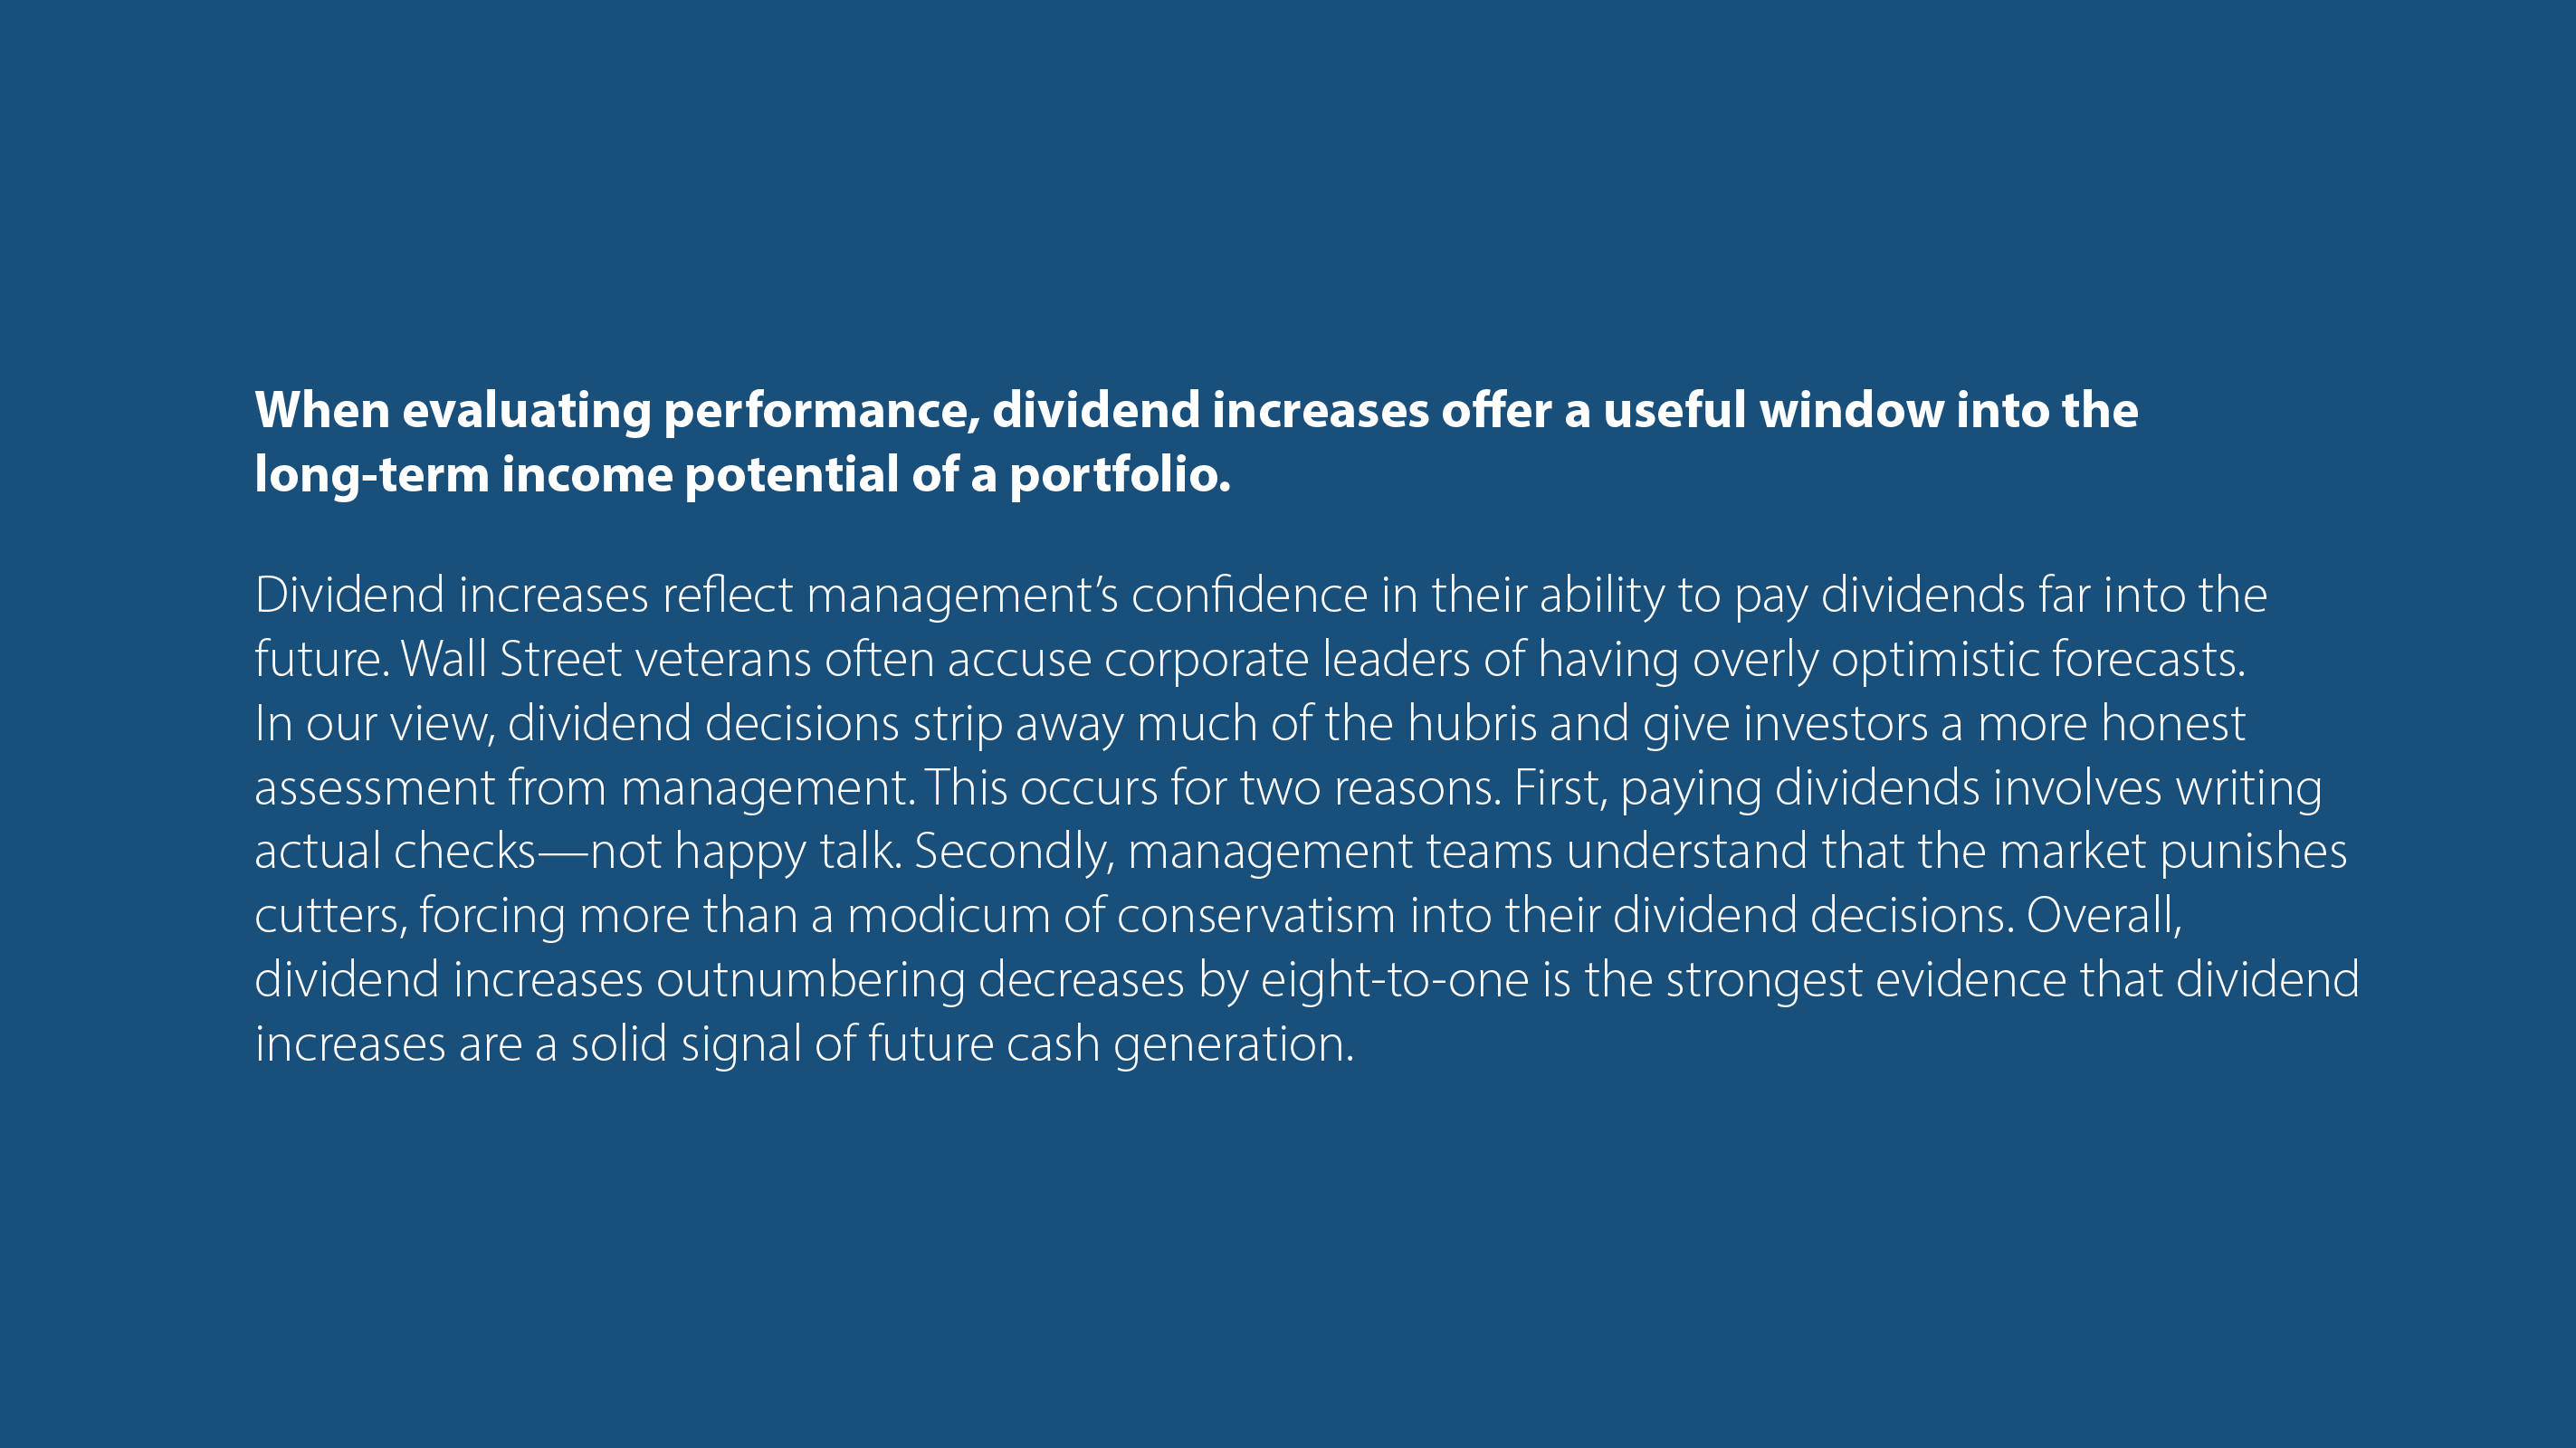 When evaluating performance, dividend increases offer a useful window into the long-term income potential of a portfolio